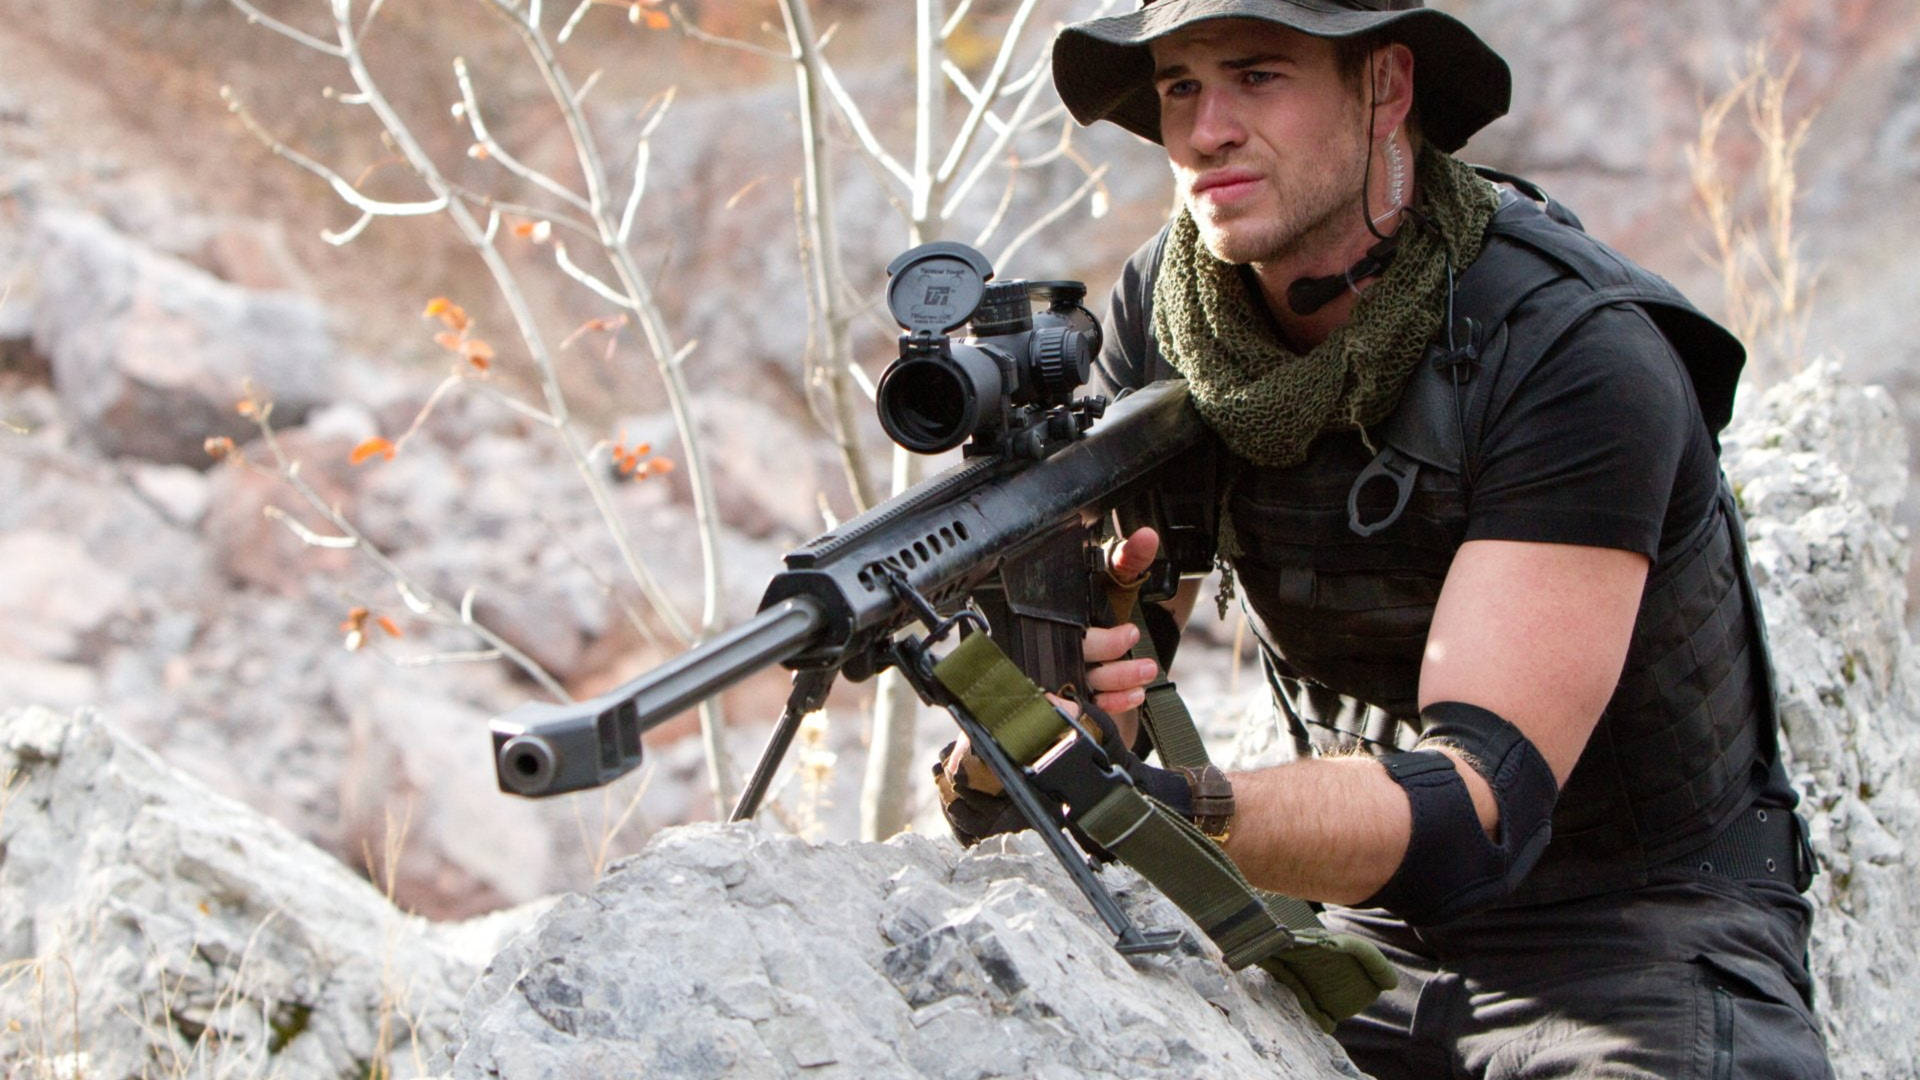 Liam Hemsworth In The Expendables